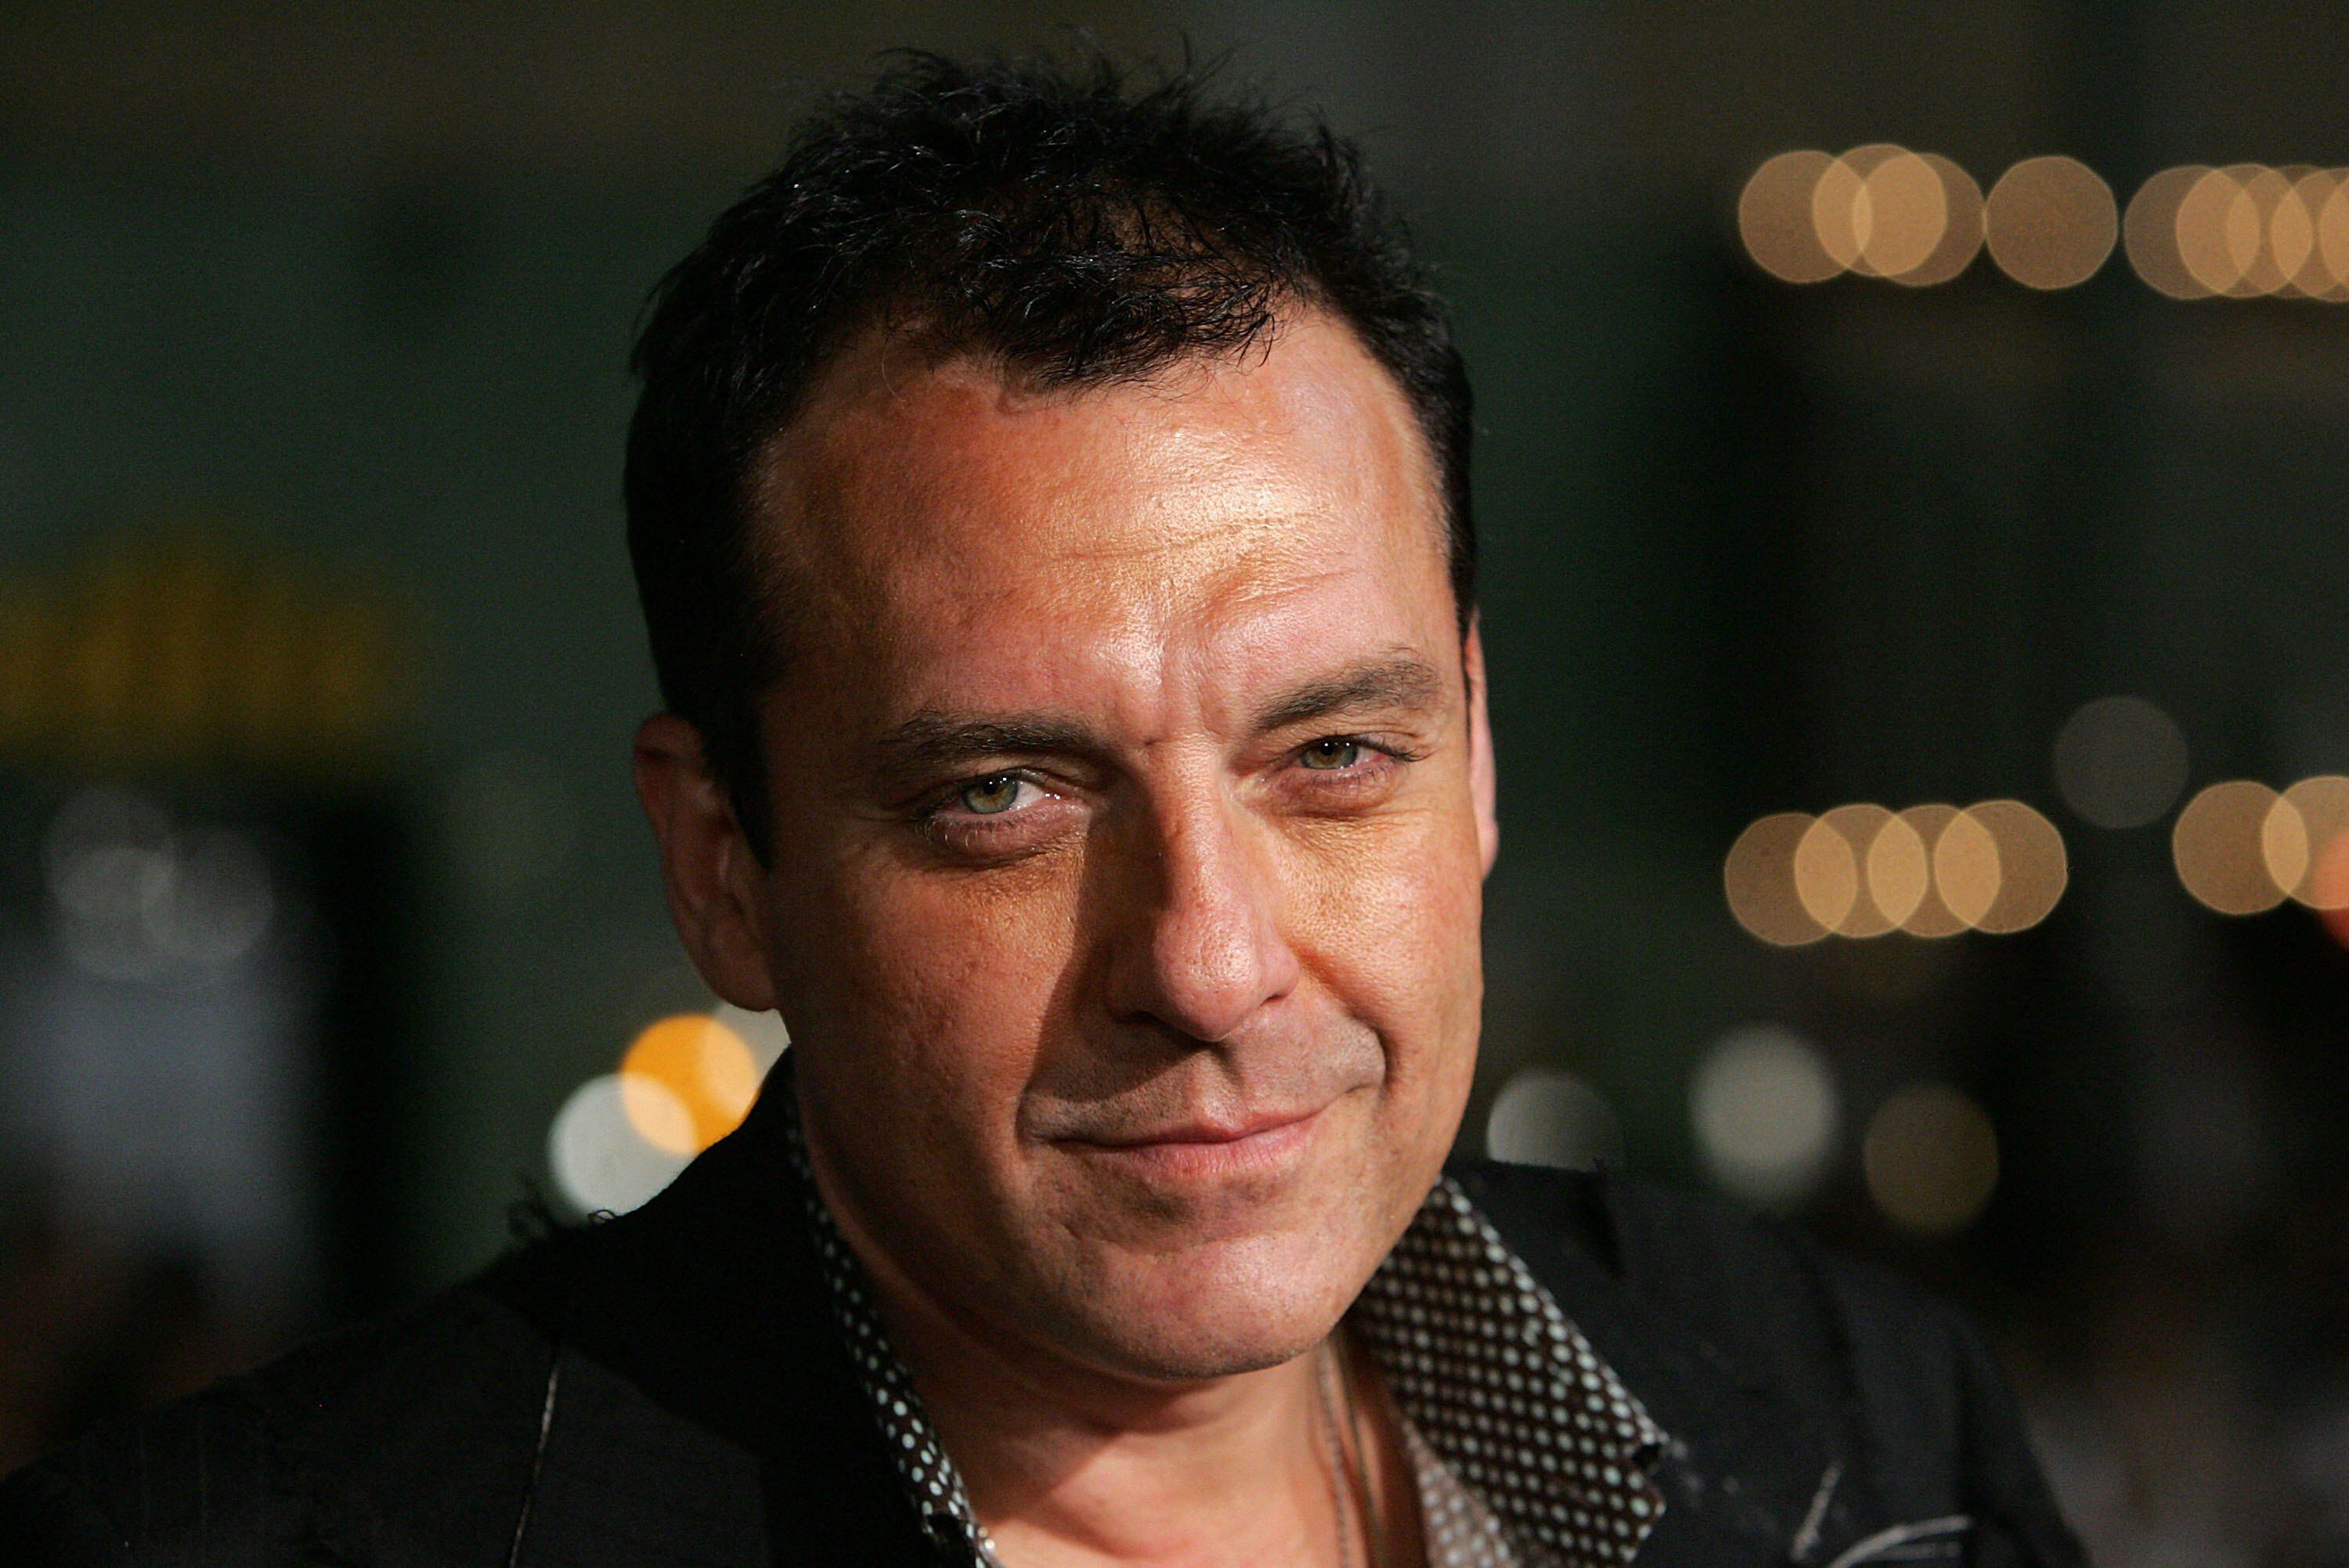 (FILES) In this file photo taken on May 5, 2007 actor Tom Sizemore arrives at the Paramount Vantage premiere of Babel at the FOX Westwood Village theatre in Westwood, California. - Tom Sizemore, a talented but troubled actor who made a career of playing tough guys, has died, his manager said March 3, 2023.
The 61-year-old suffered a brain aneurysm in February and on Friday was removed from life support, days after doctors concluded no more could be done for him, Charles Lago said. (Photo by Frazer Harrison / GETTY IMAGES NORTH AMERICA / AFP)